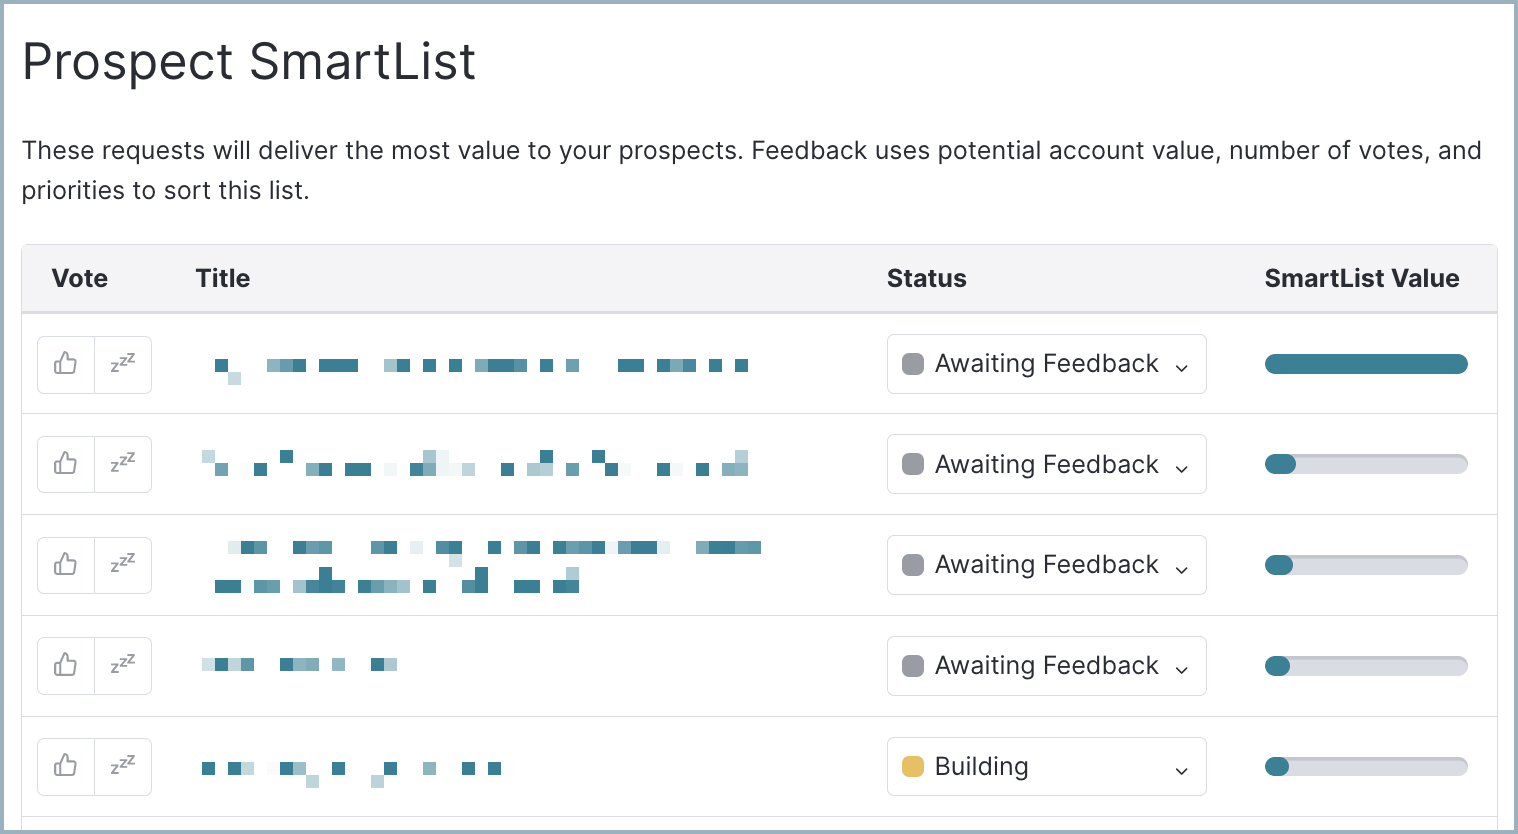 Feedback_Reports_Predefined_Prospect.png